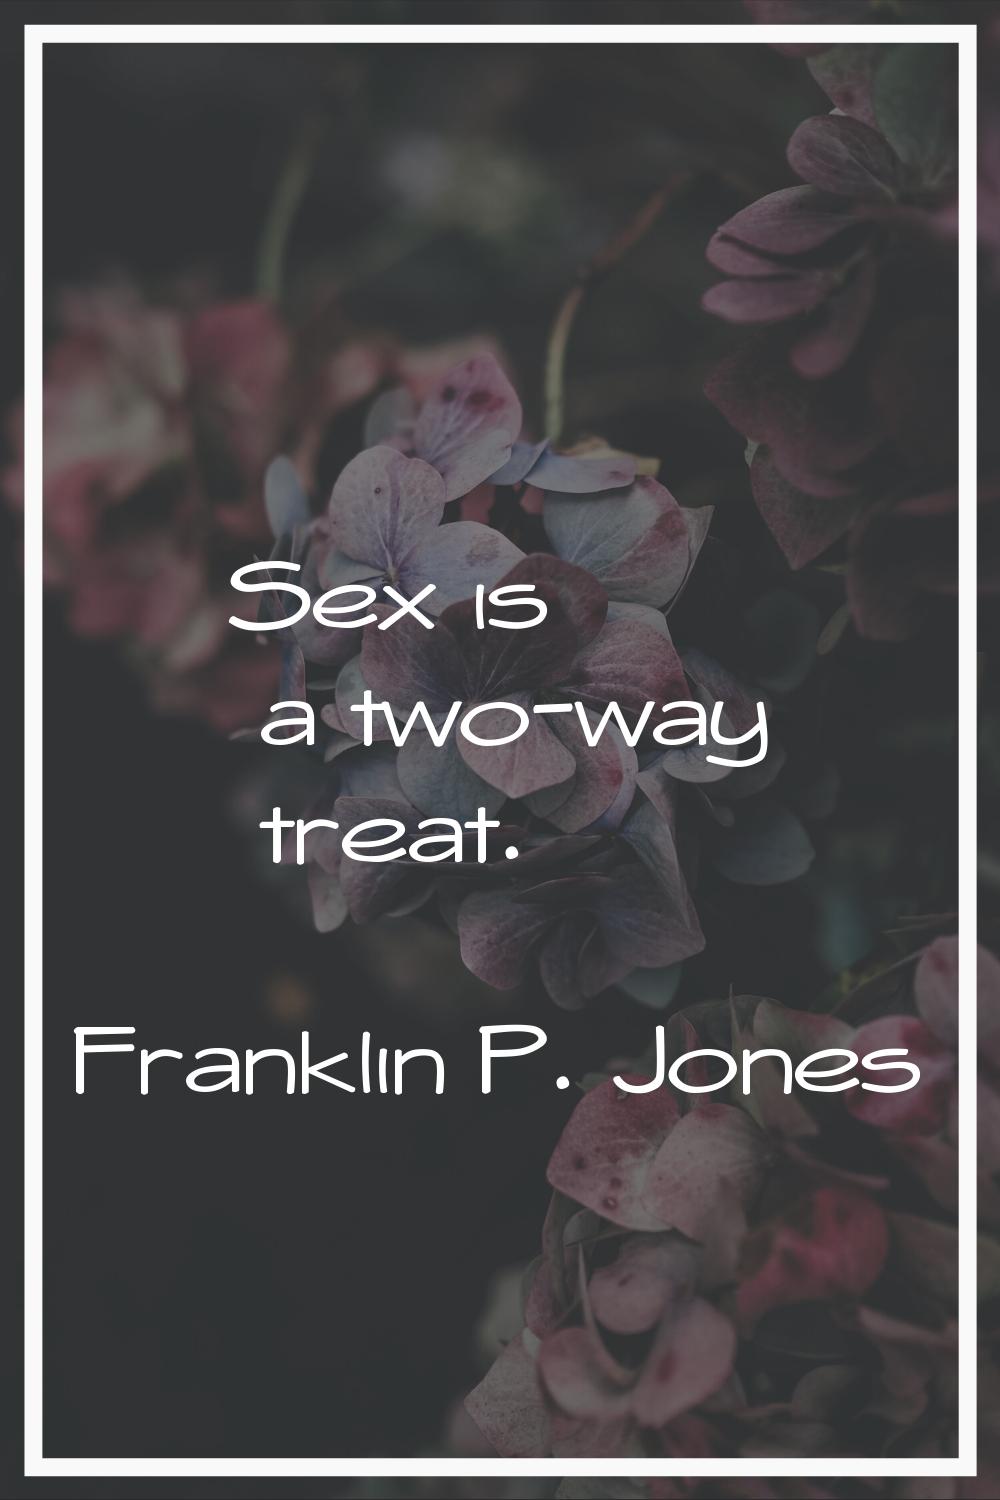 Sex is a two-way treat.